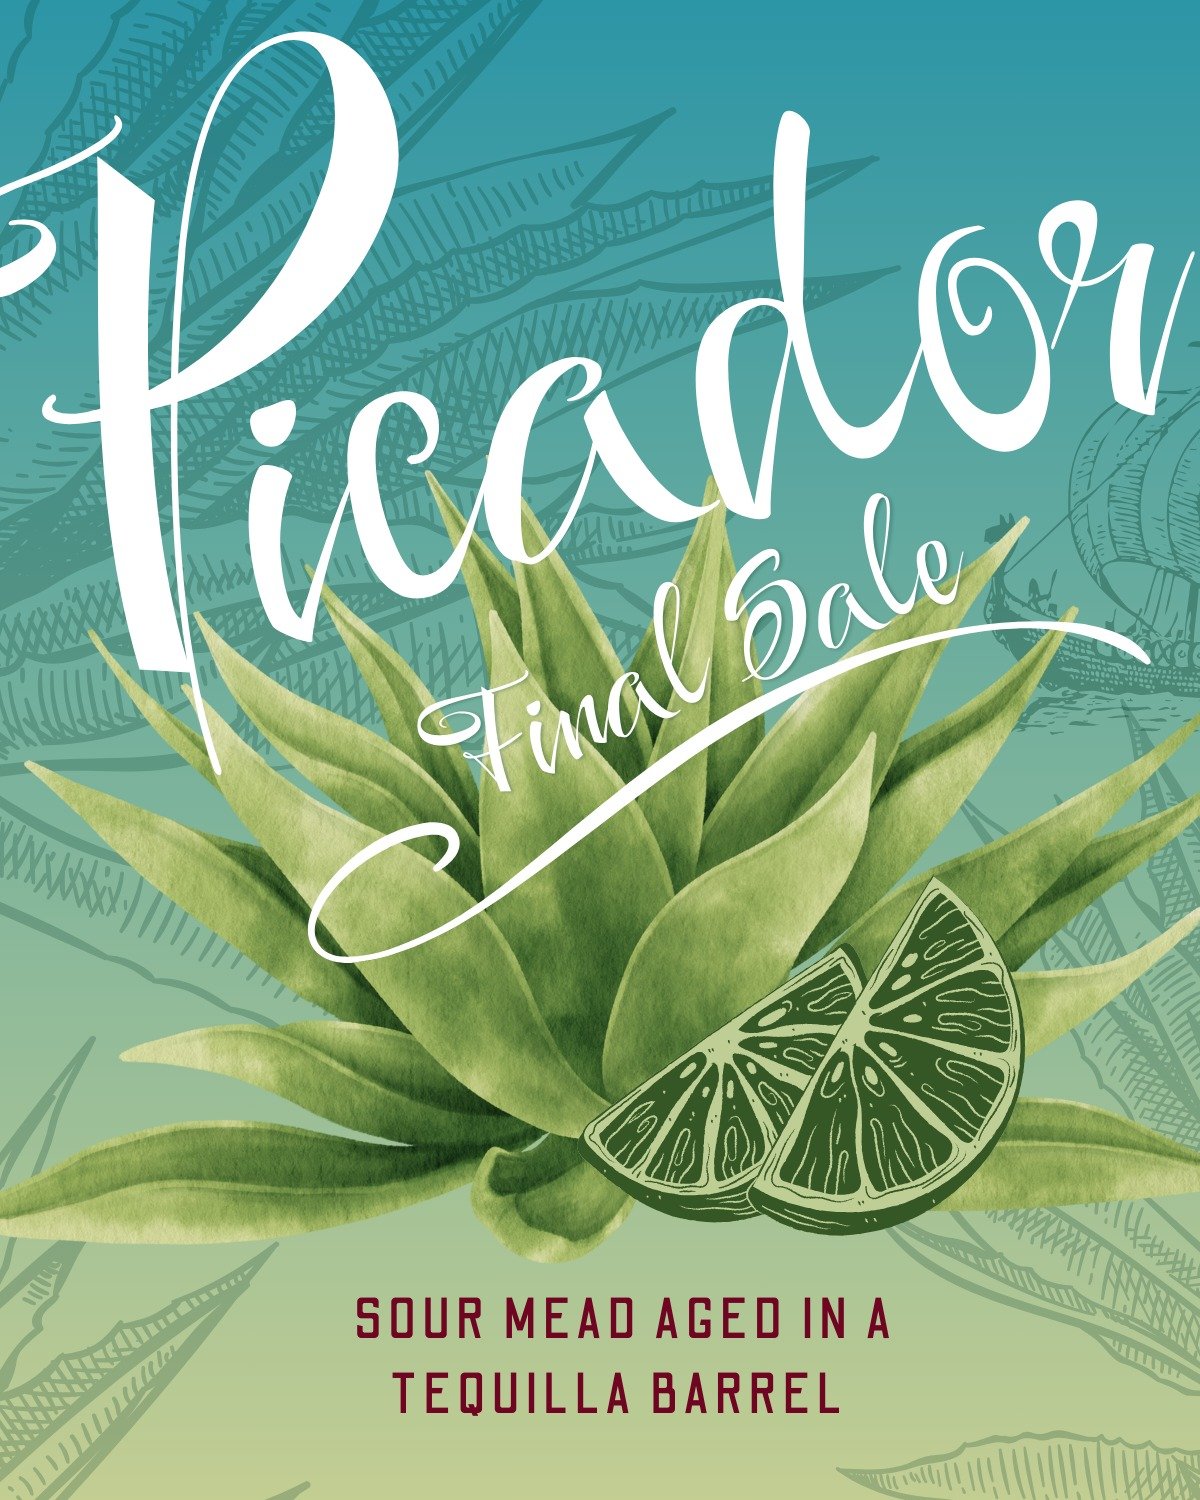 Cinco de Mayo is coming up fast and we've got a great mead to pair with it, PICADOR!
There are only 35 bottles left. Once these are gone, it's gone forever.
Much like the French at that battle of Puebla, this is the beginning of the end! 

Picador: T